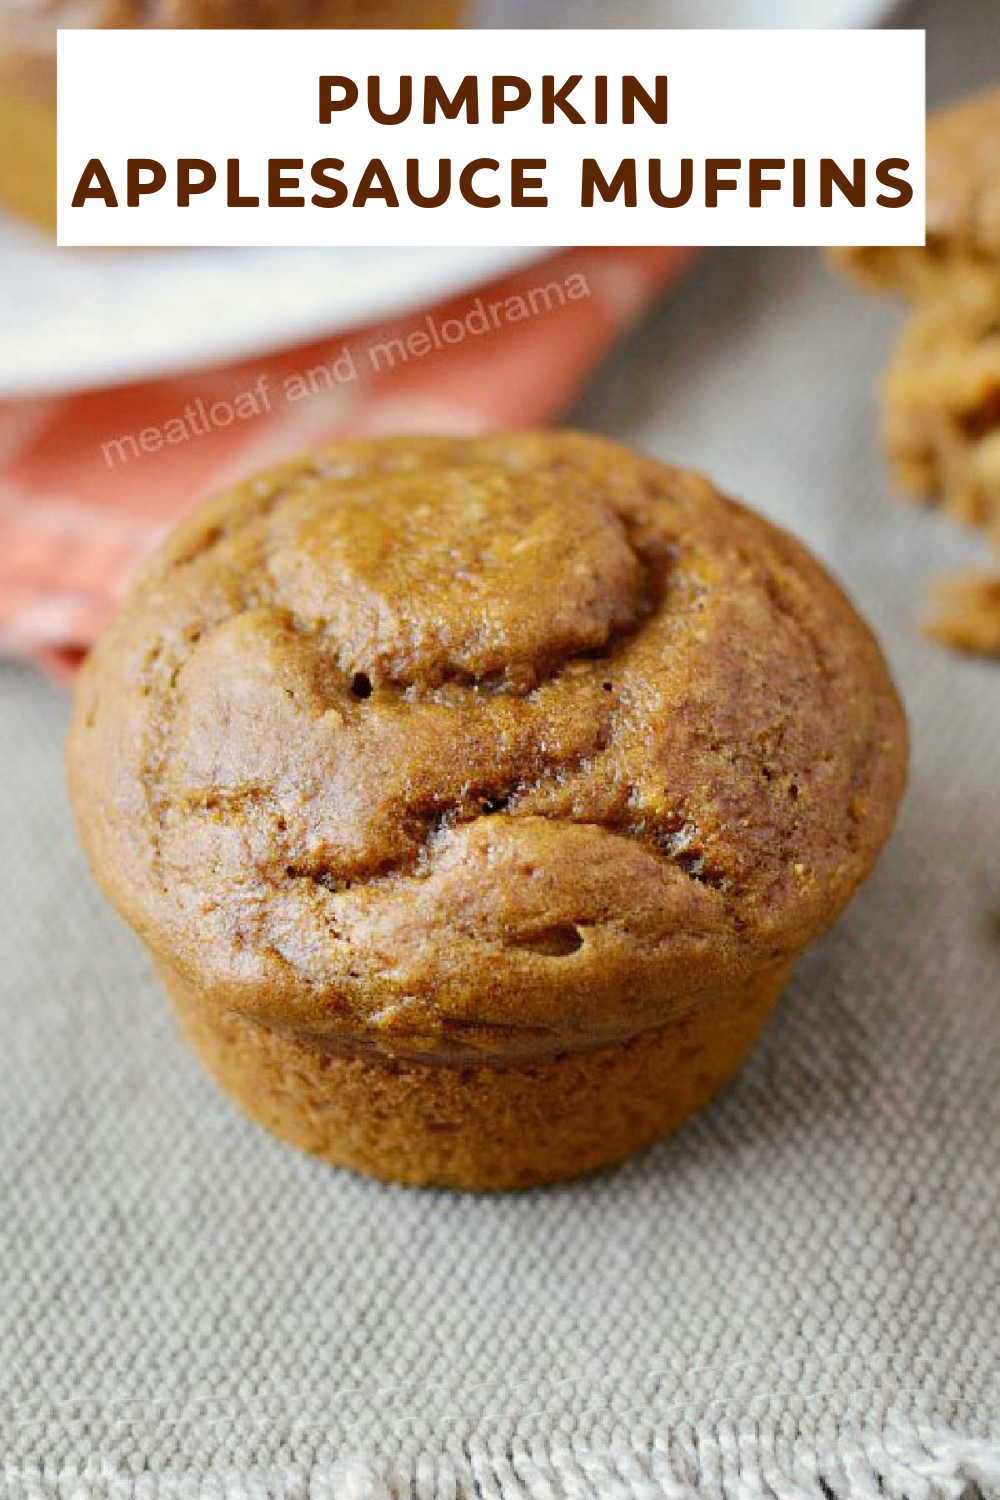 Make the Easy Pumpkin Muffins with Applesauce, pumpkin puree and a hint of spice with this delicious pumpkin muffin recipe.  These muffins are moist with a tender crumb and perfect for fall breakfasts! via @meamel